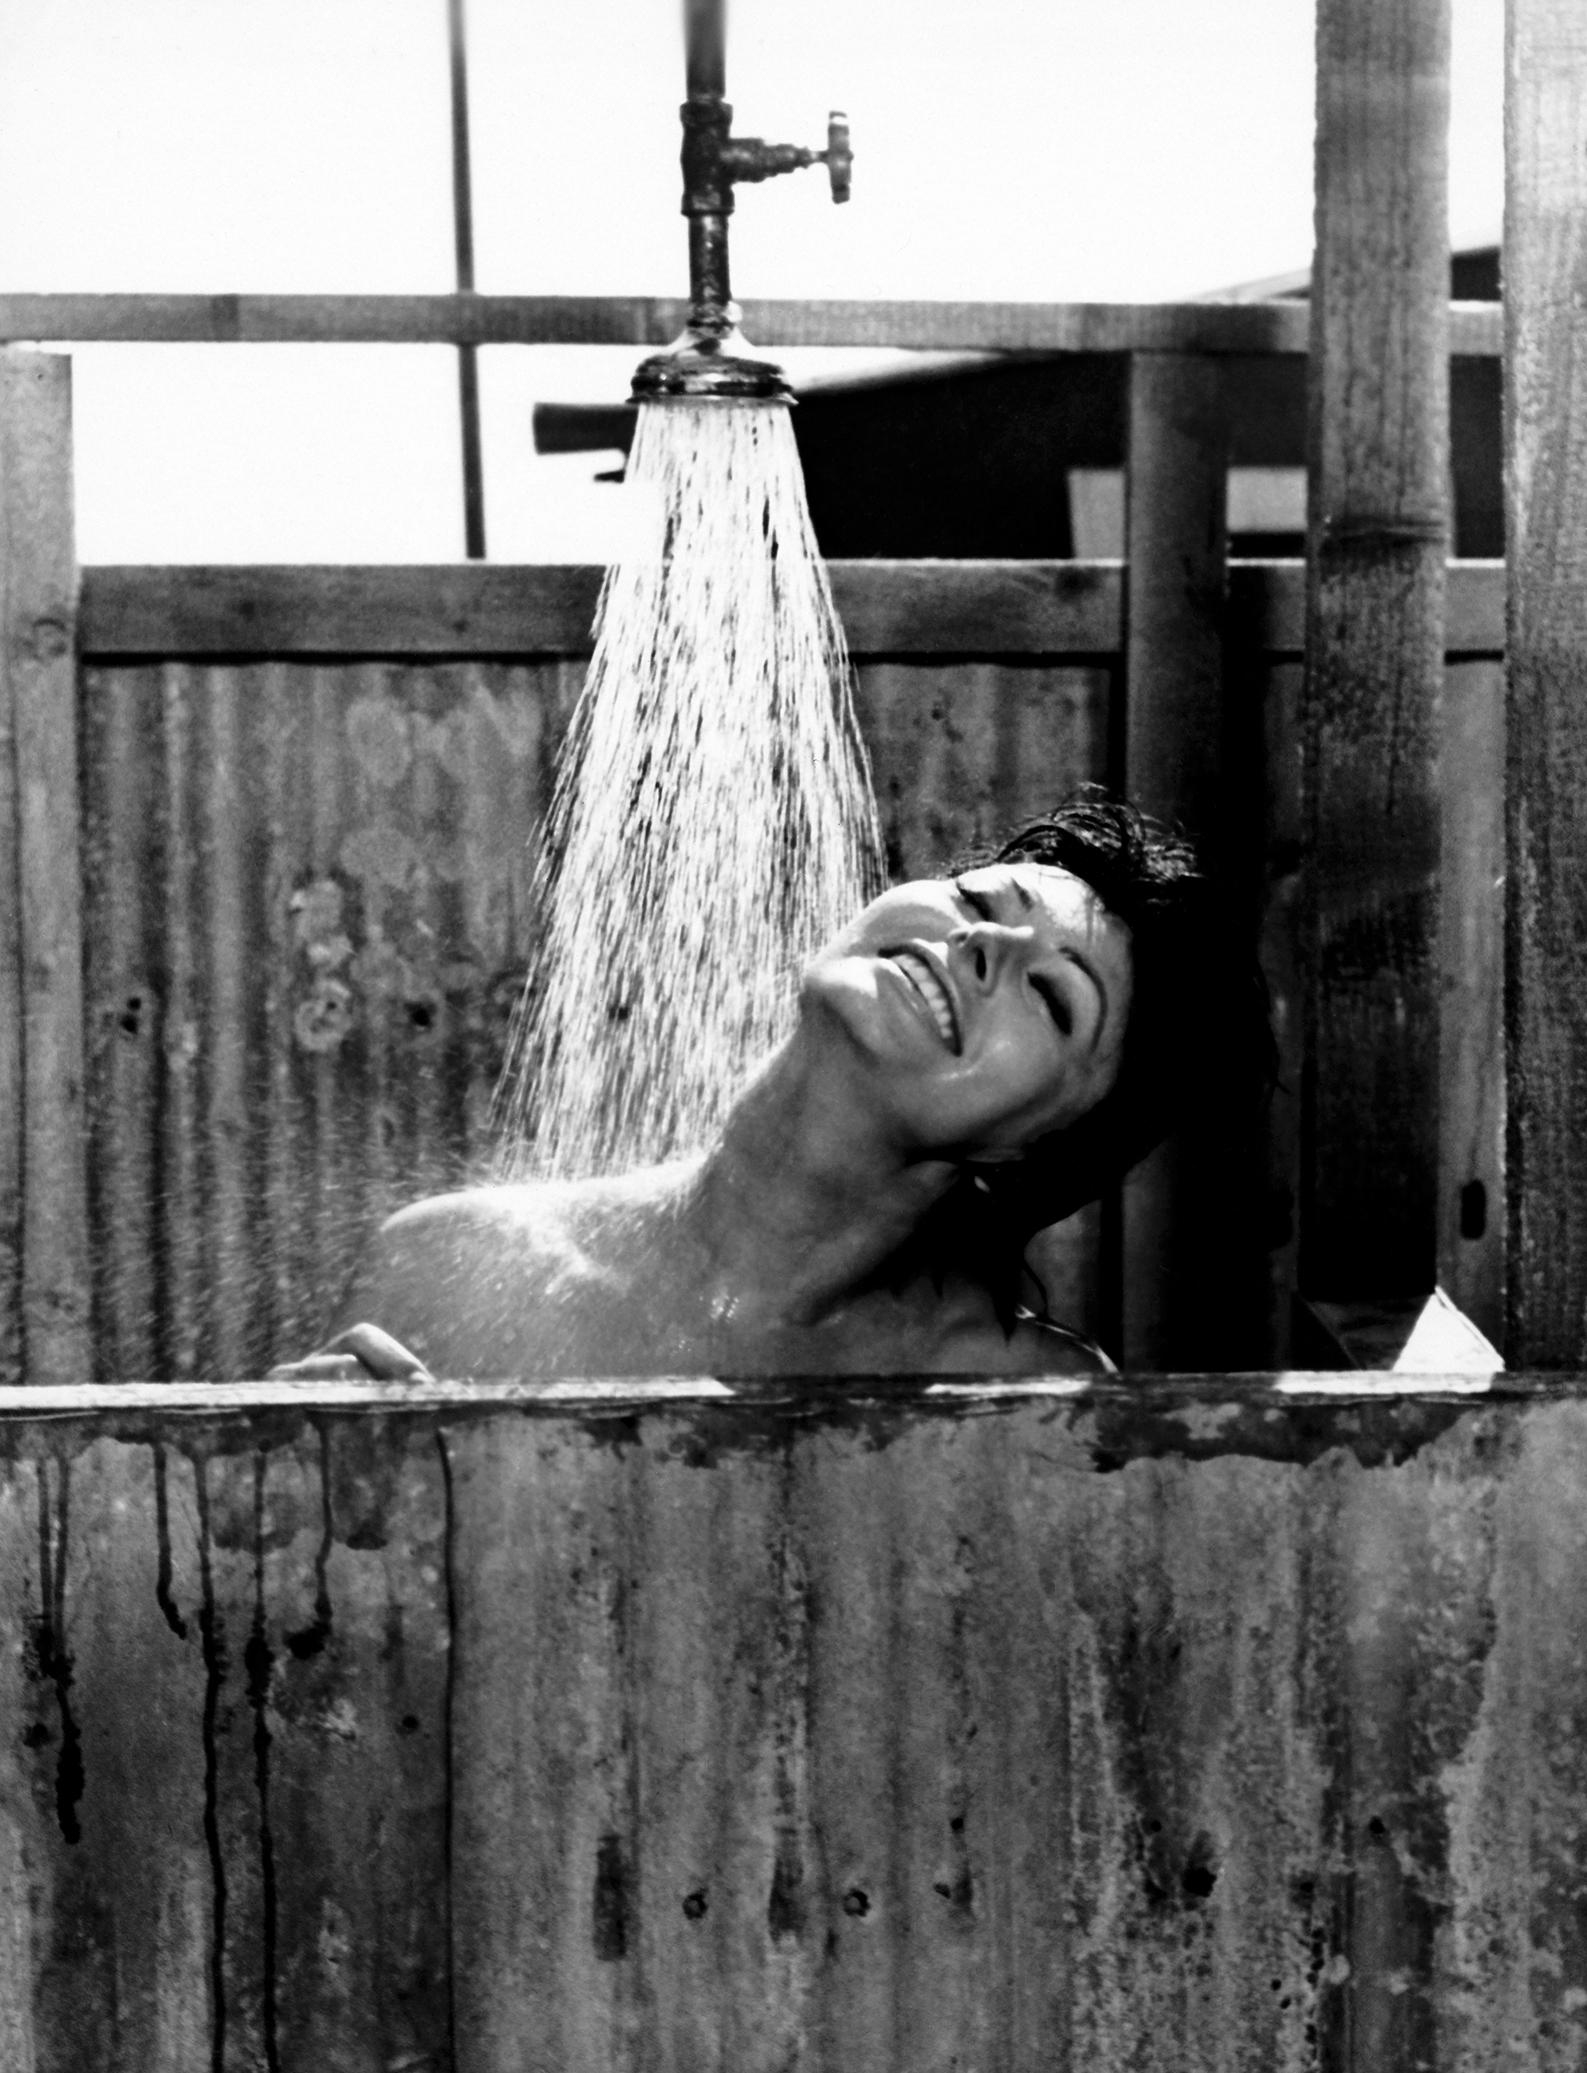 Unknown Black and White Photograph - Sophia Loren Showering in "Judith"